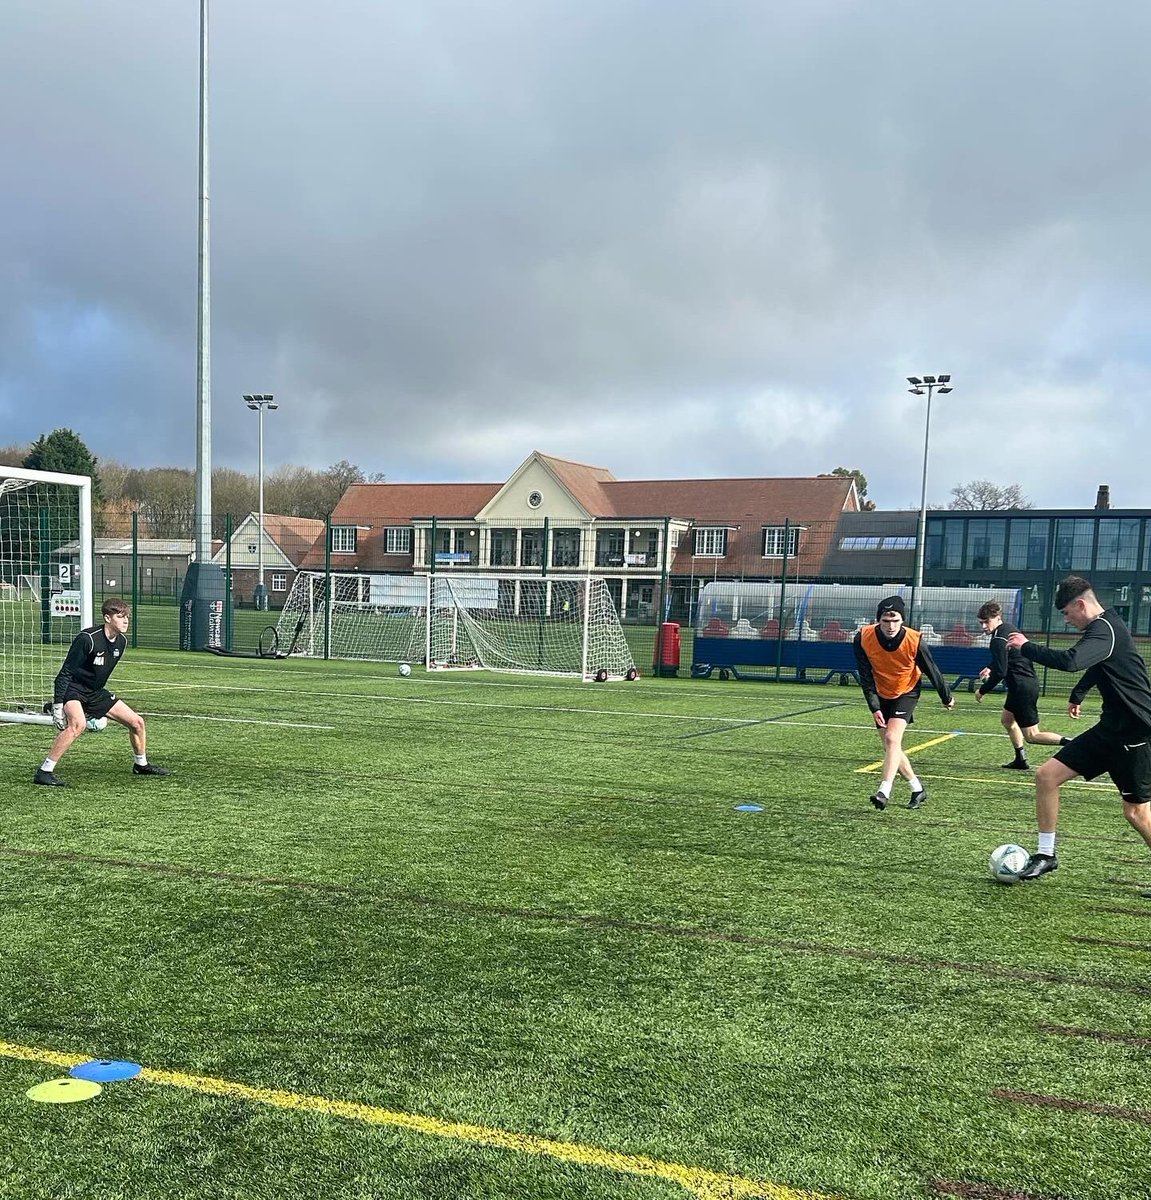 College lads working hard today at attacking in final third ahead of 2 games this week. ⚽️ Finishing ⚽️ Combination play ⚽️ Overloads 🥅 Lots of goals #workhardtrainhard #development